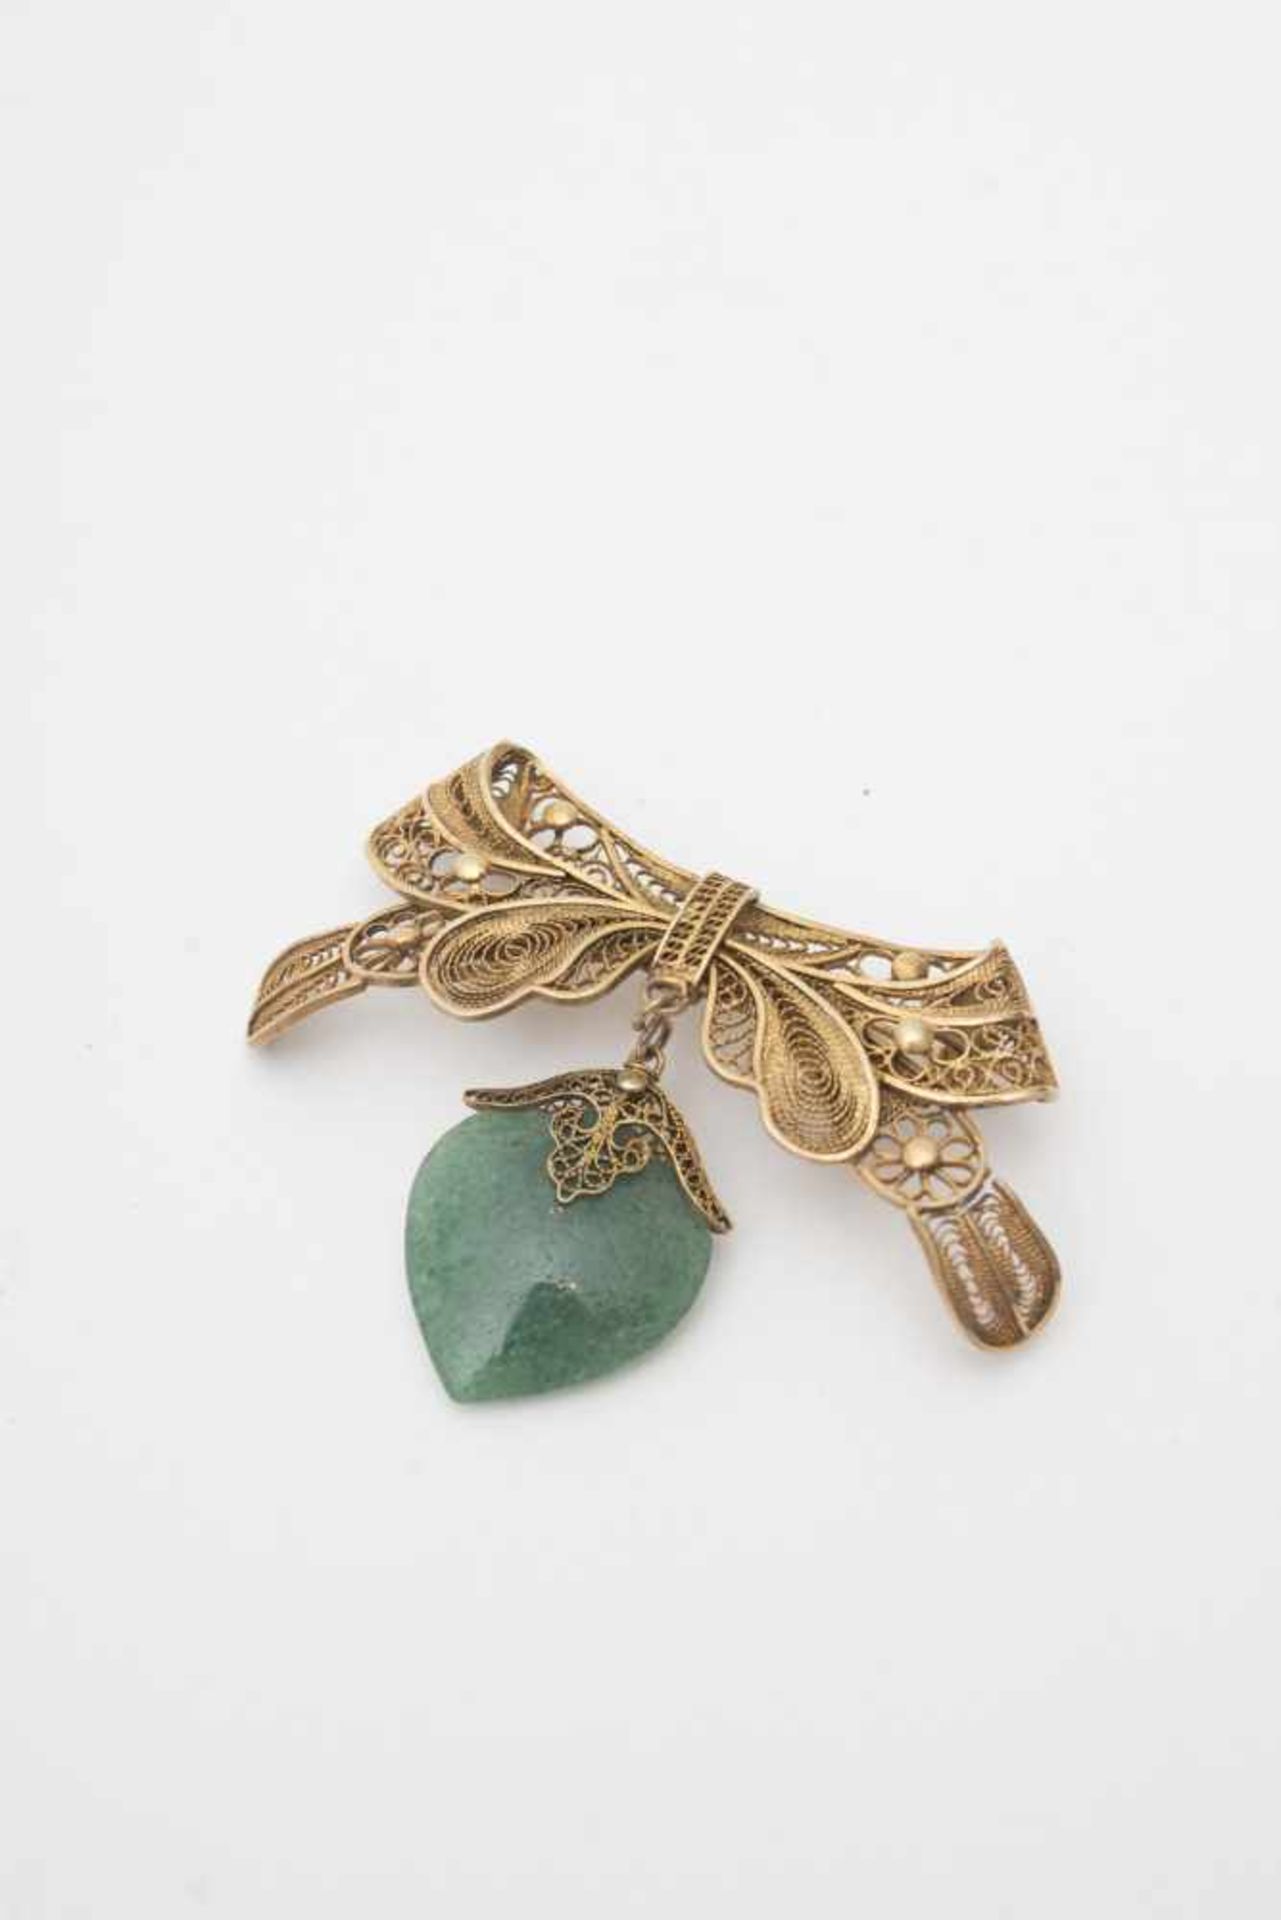 Brooch - China, 20th century Silver filigree, featuring a knot embellished with a heart-shaped green